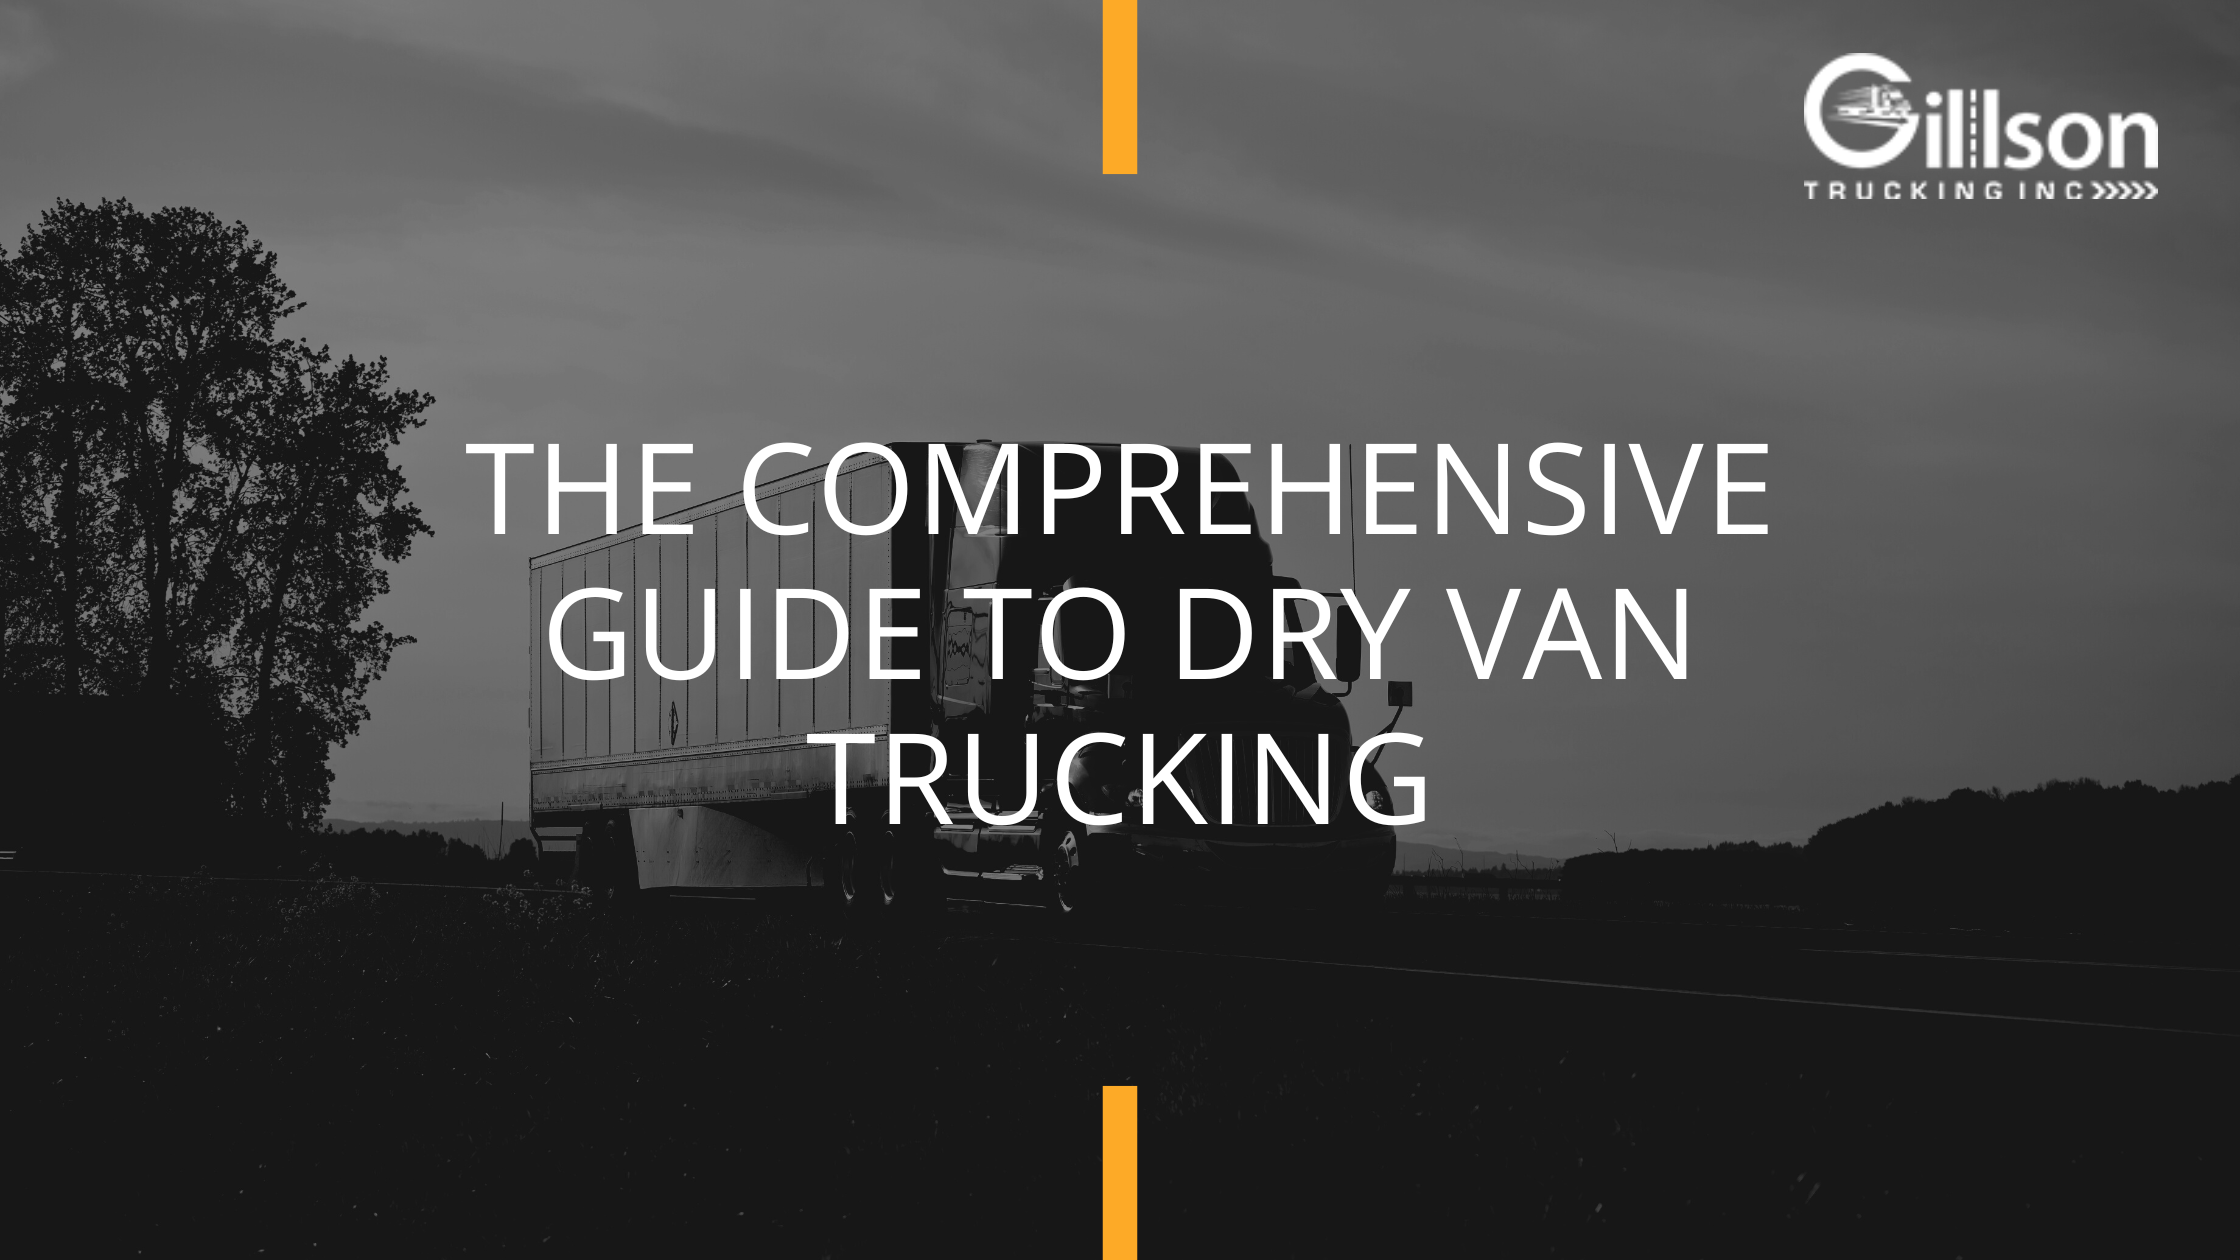 The Comprehensive Guide to Dry Van Trucking - Gillson Trucking